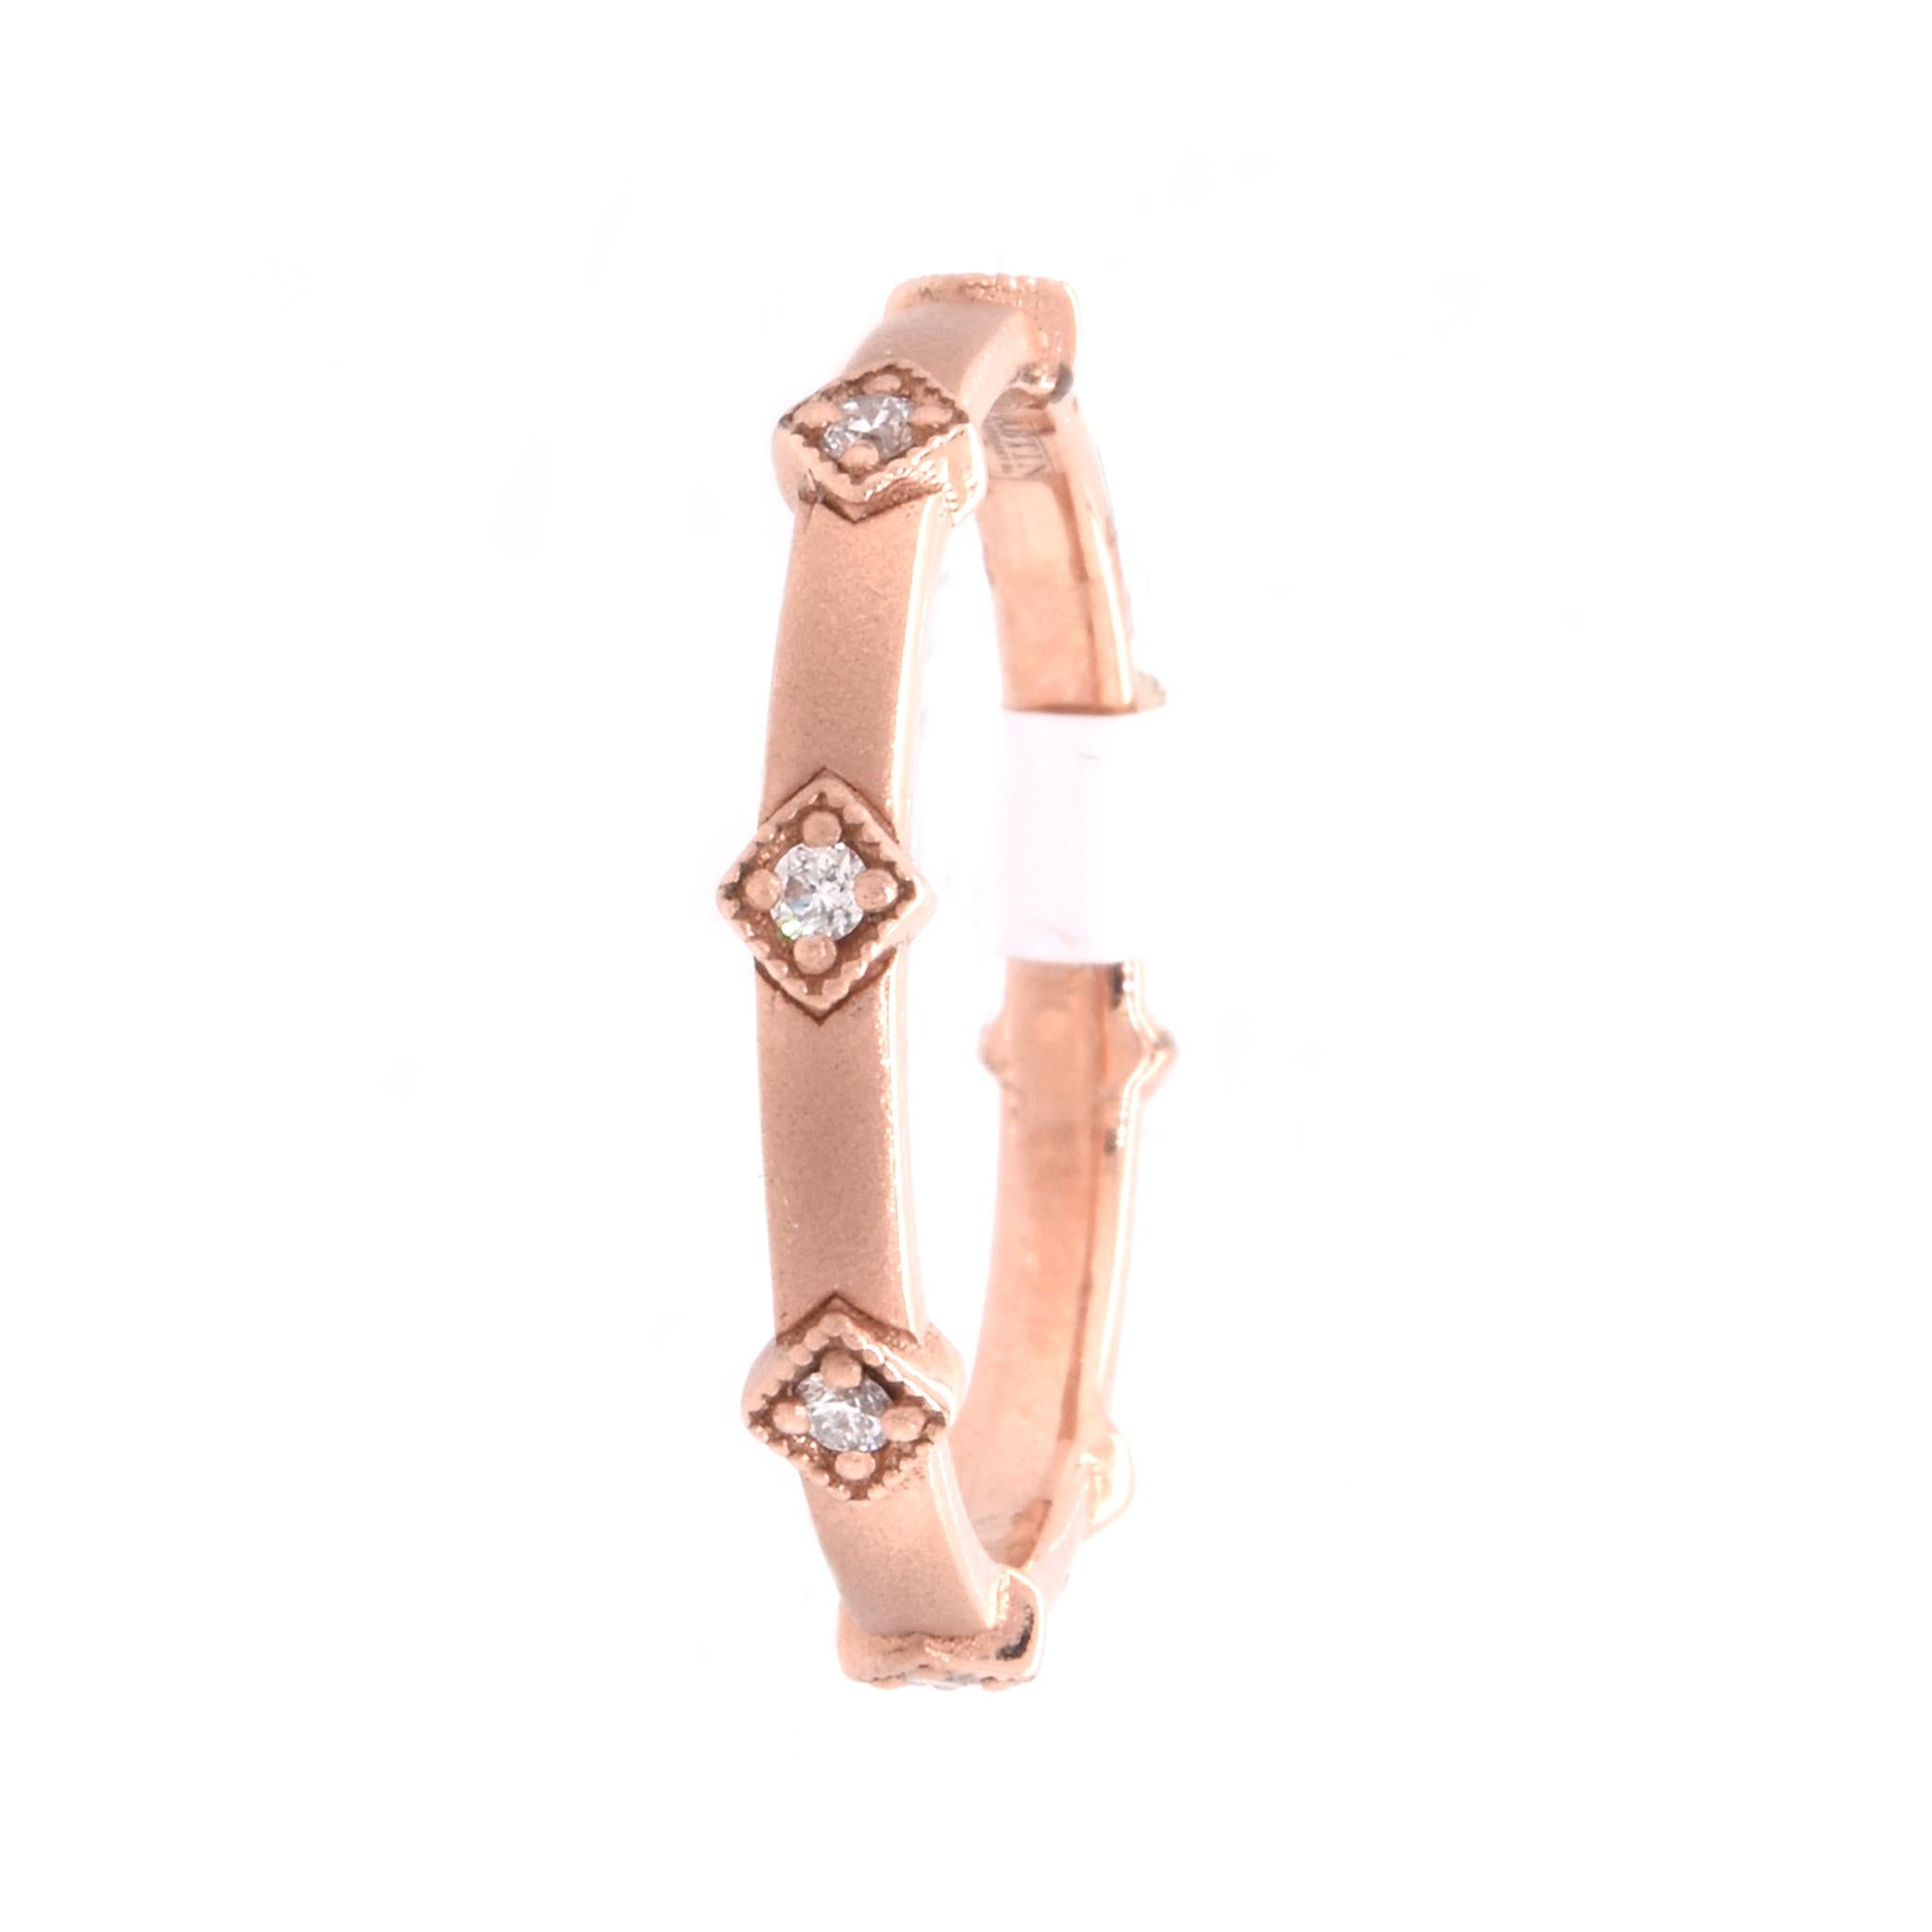 14 Karat Rose Gold Satin Finished Diamond Band In Excellent Condition For Sale In Scottsdale, AZ